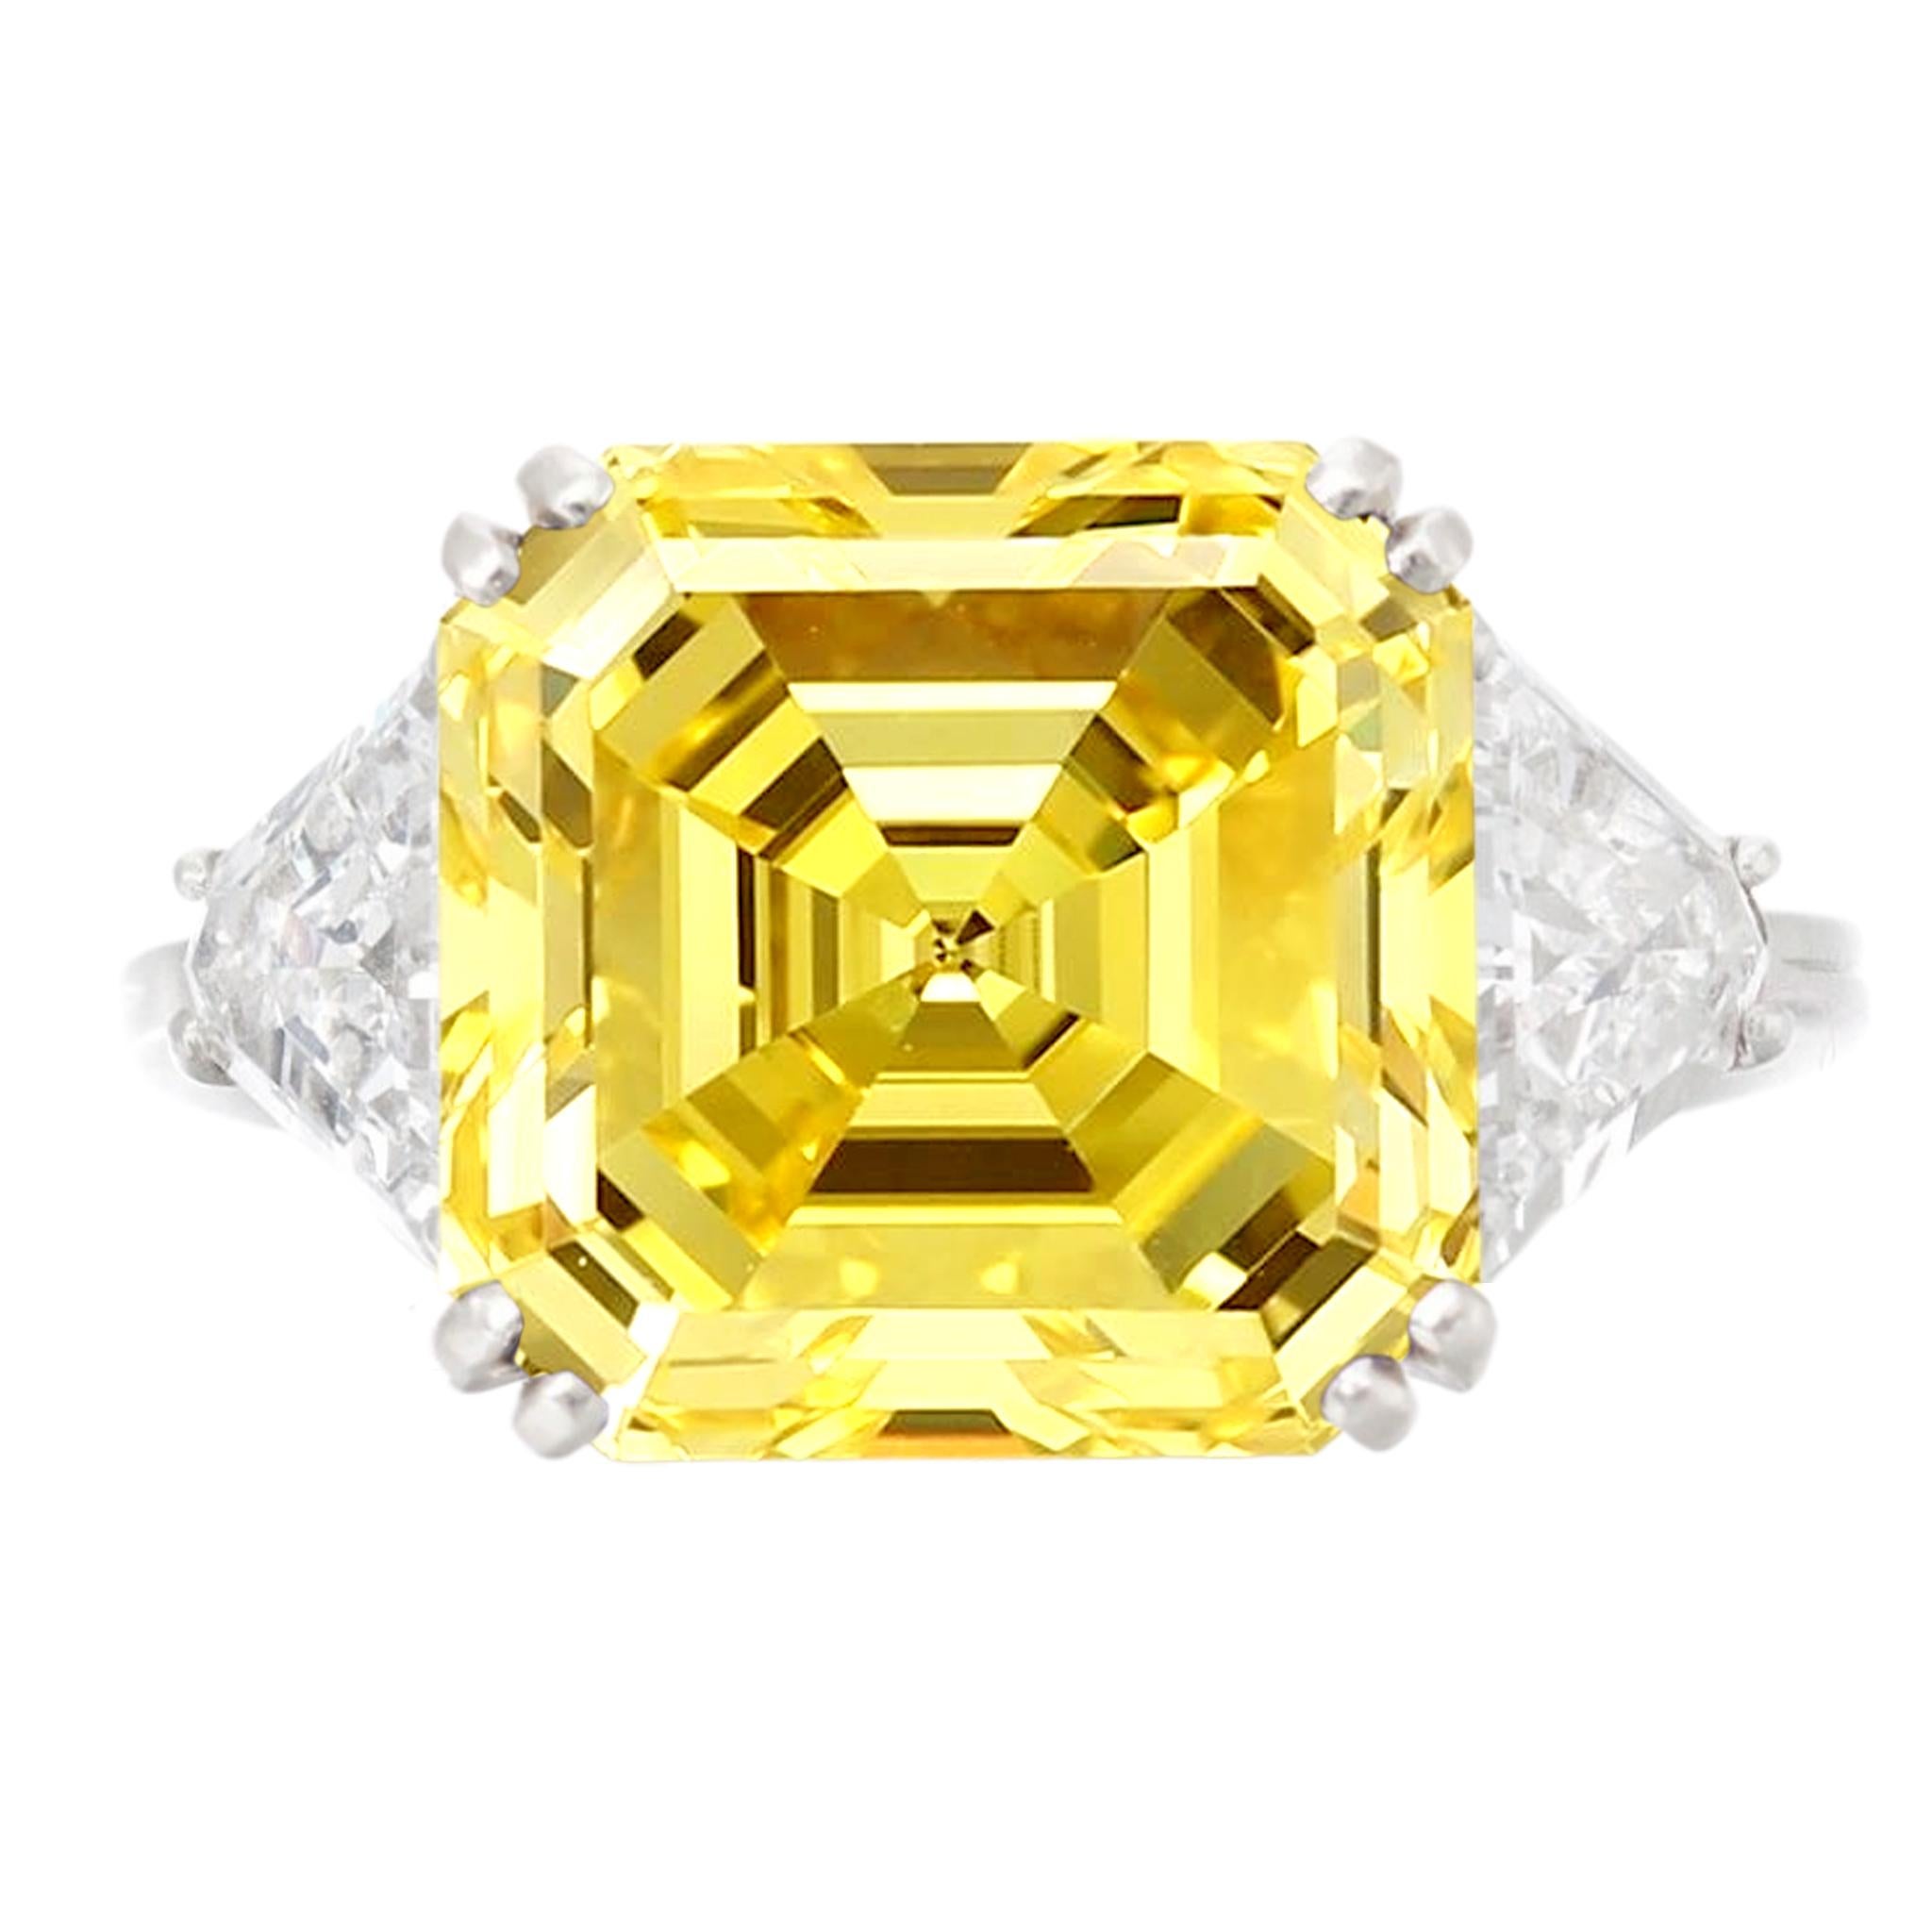 GIA Certified 7 carat emerald Cut Fancy Yellow is accompanied by a GIA certificate. This beautiful bright Asscher cut is set in a handmade 18k yellow gold setting

Love this diamond but need personalized customization? Please reach out to us, will